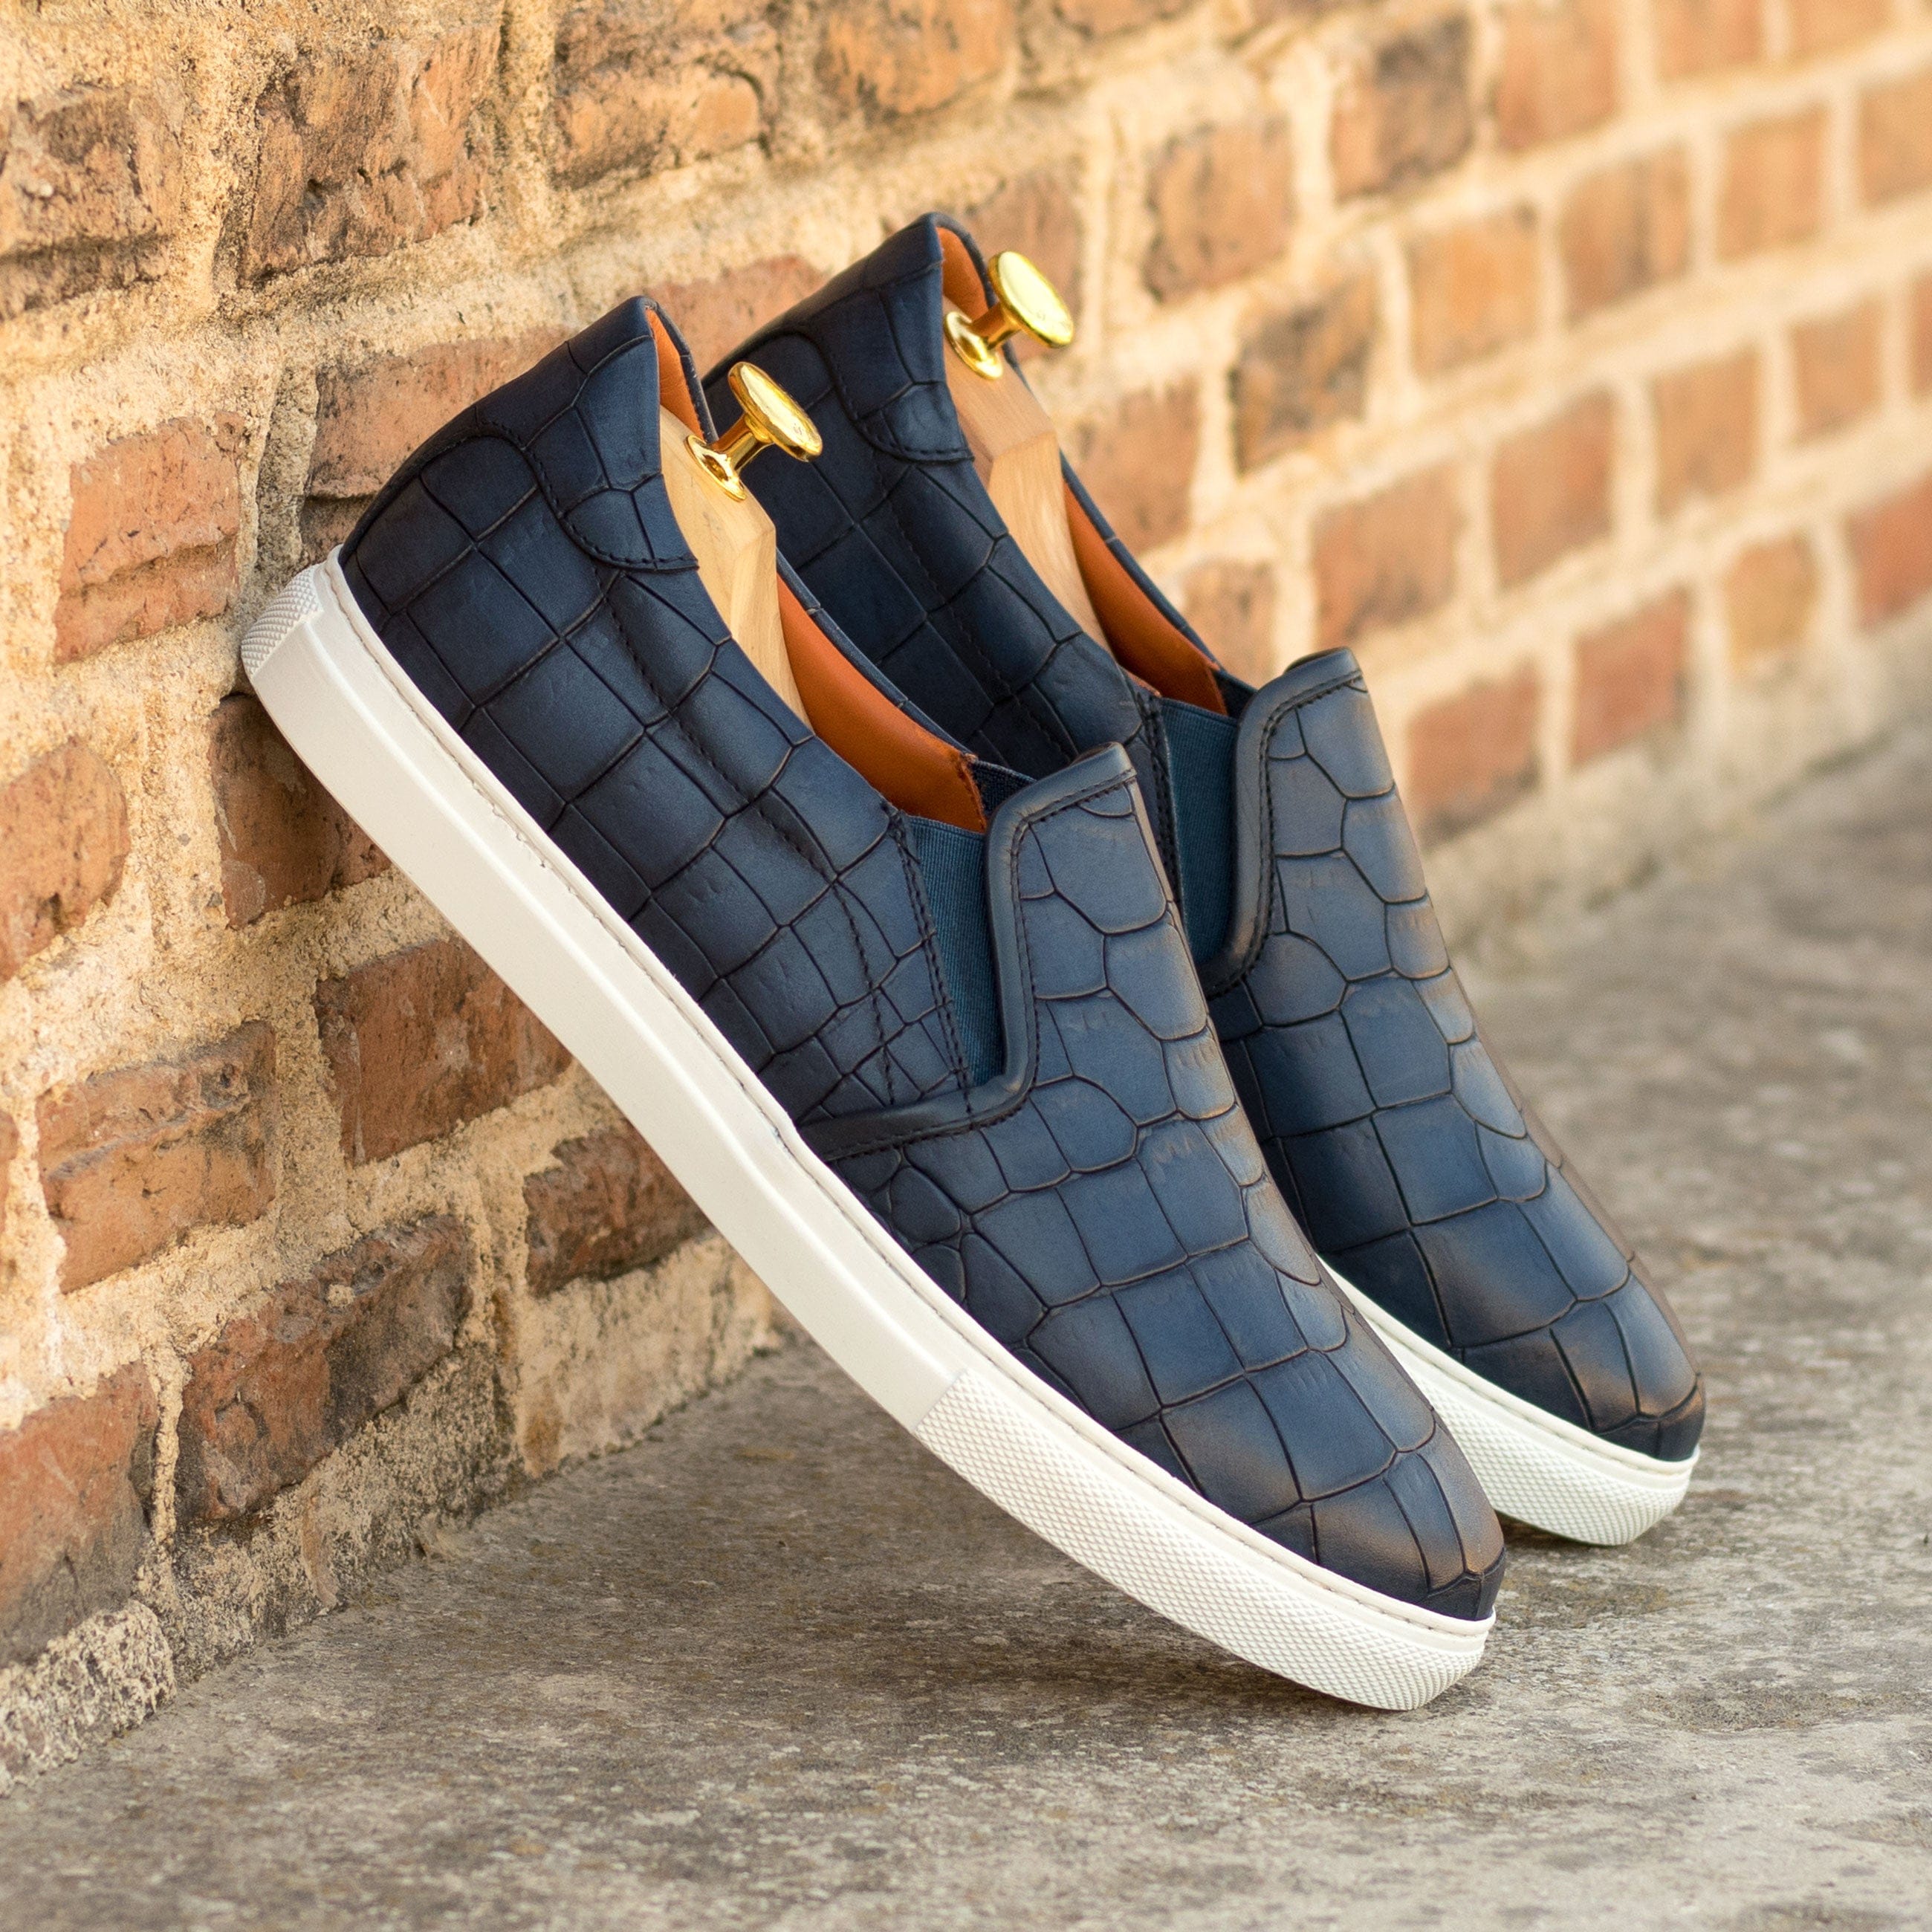 Black Label Shoes Slip On Casual No. 5429